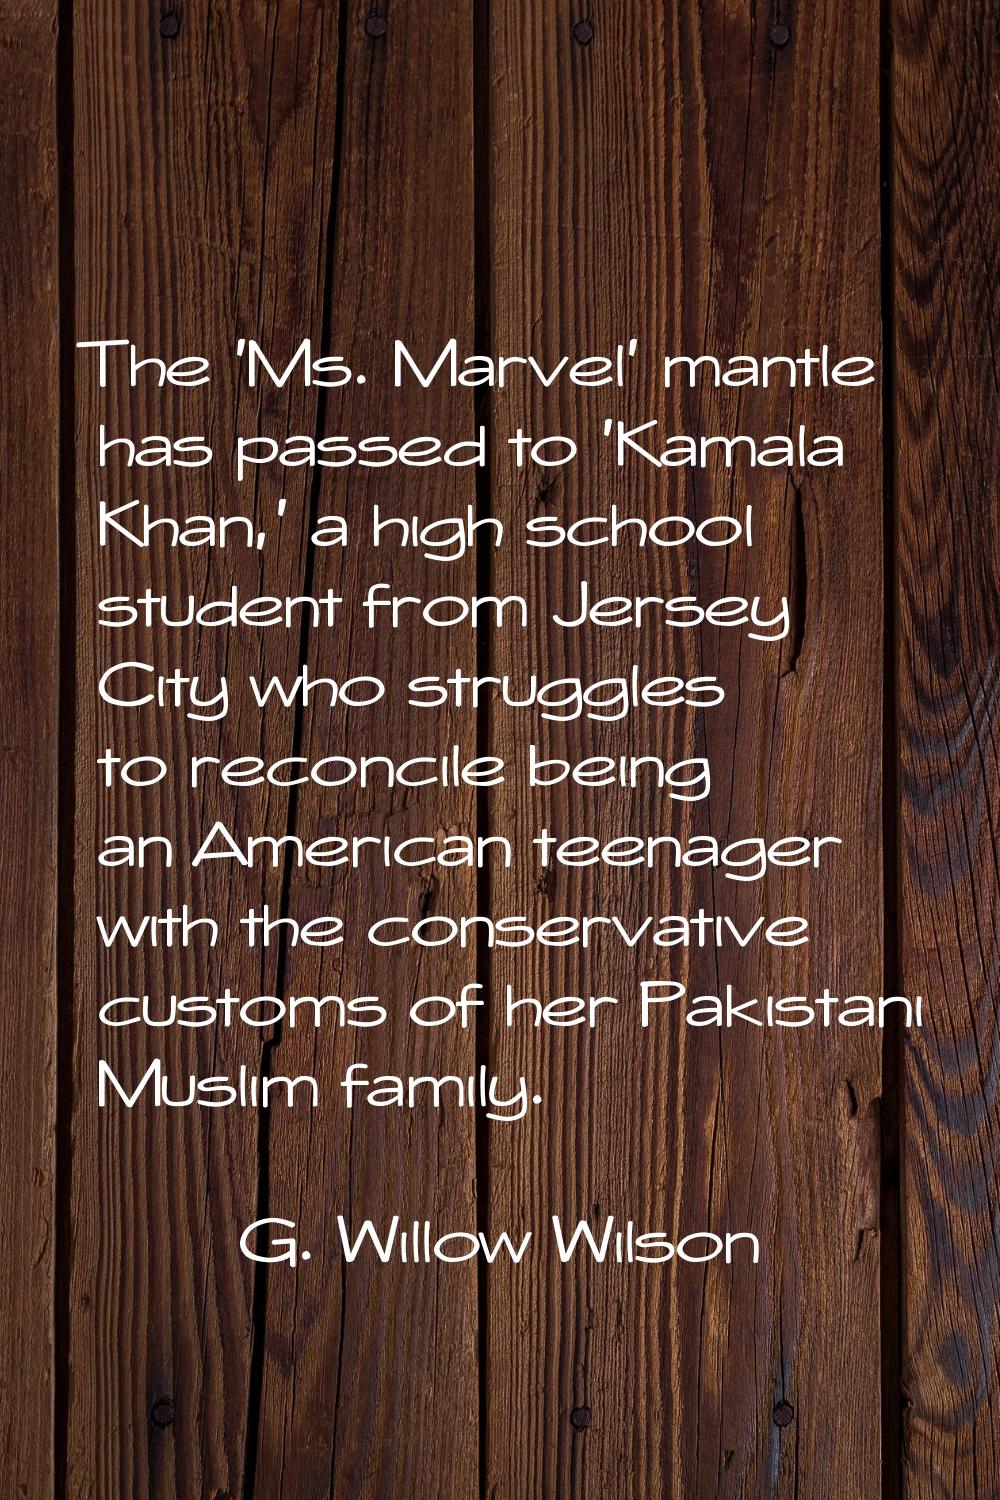 The 'Ms. Marvel' mantle has passed to 'Kamala Khan,' a high school student from Jersey City who str